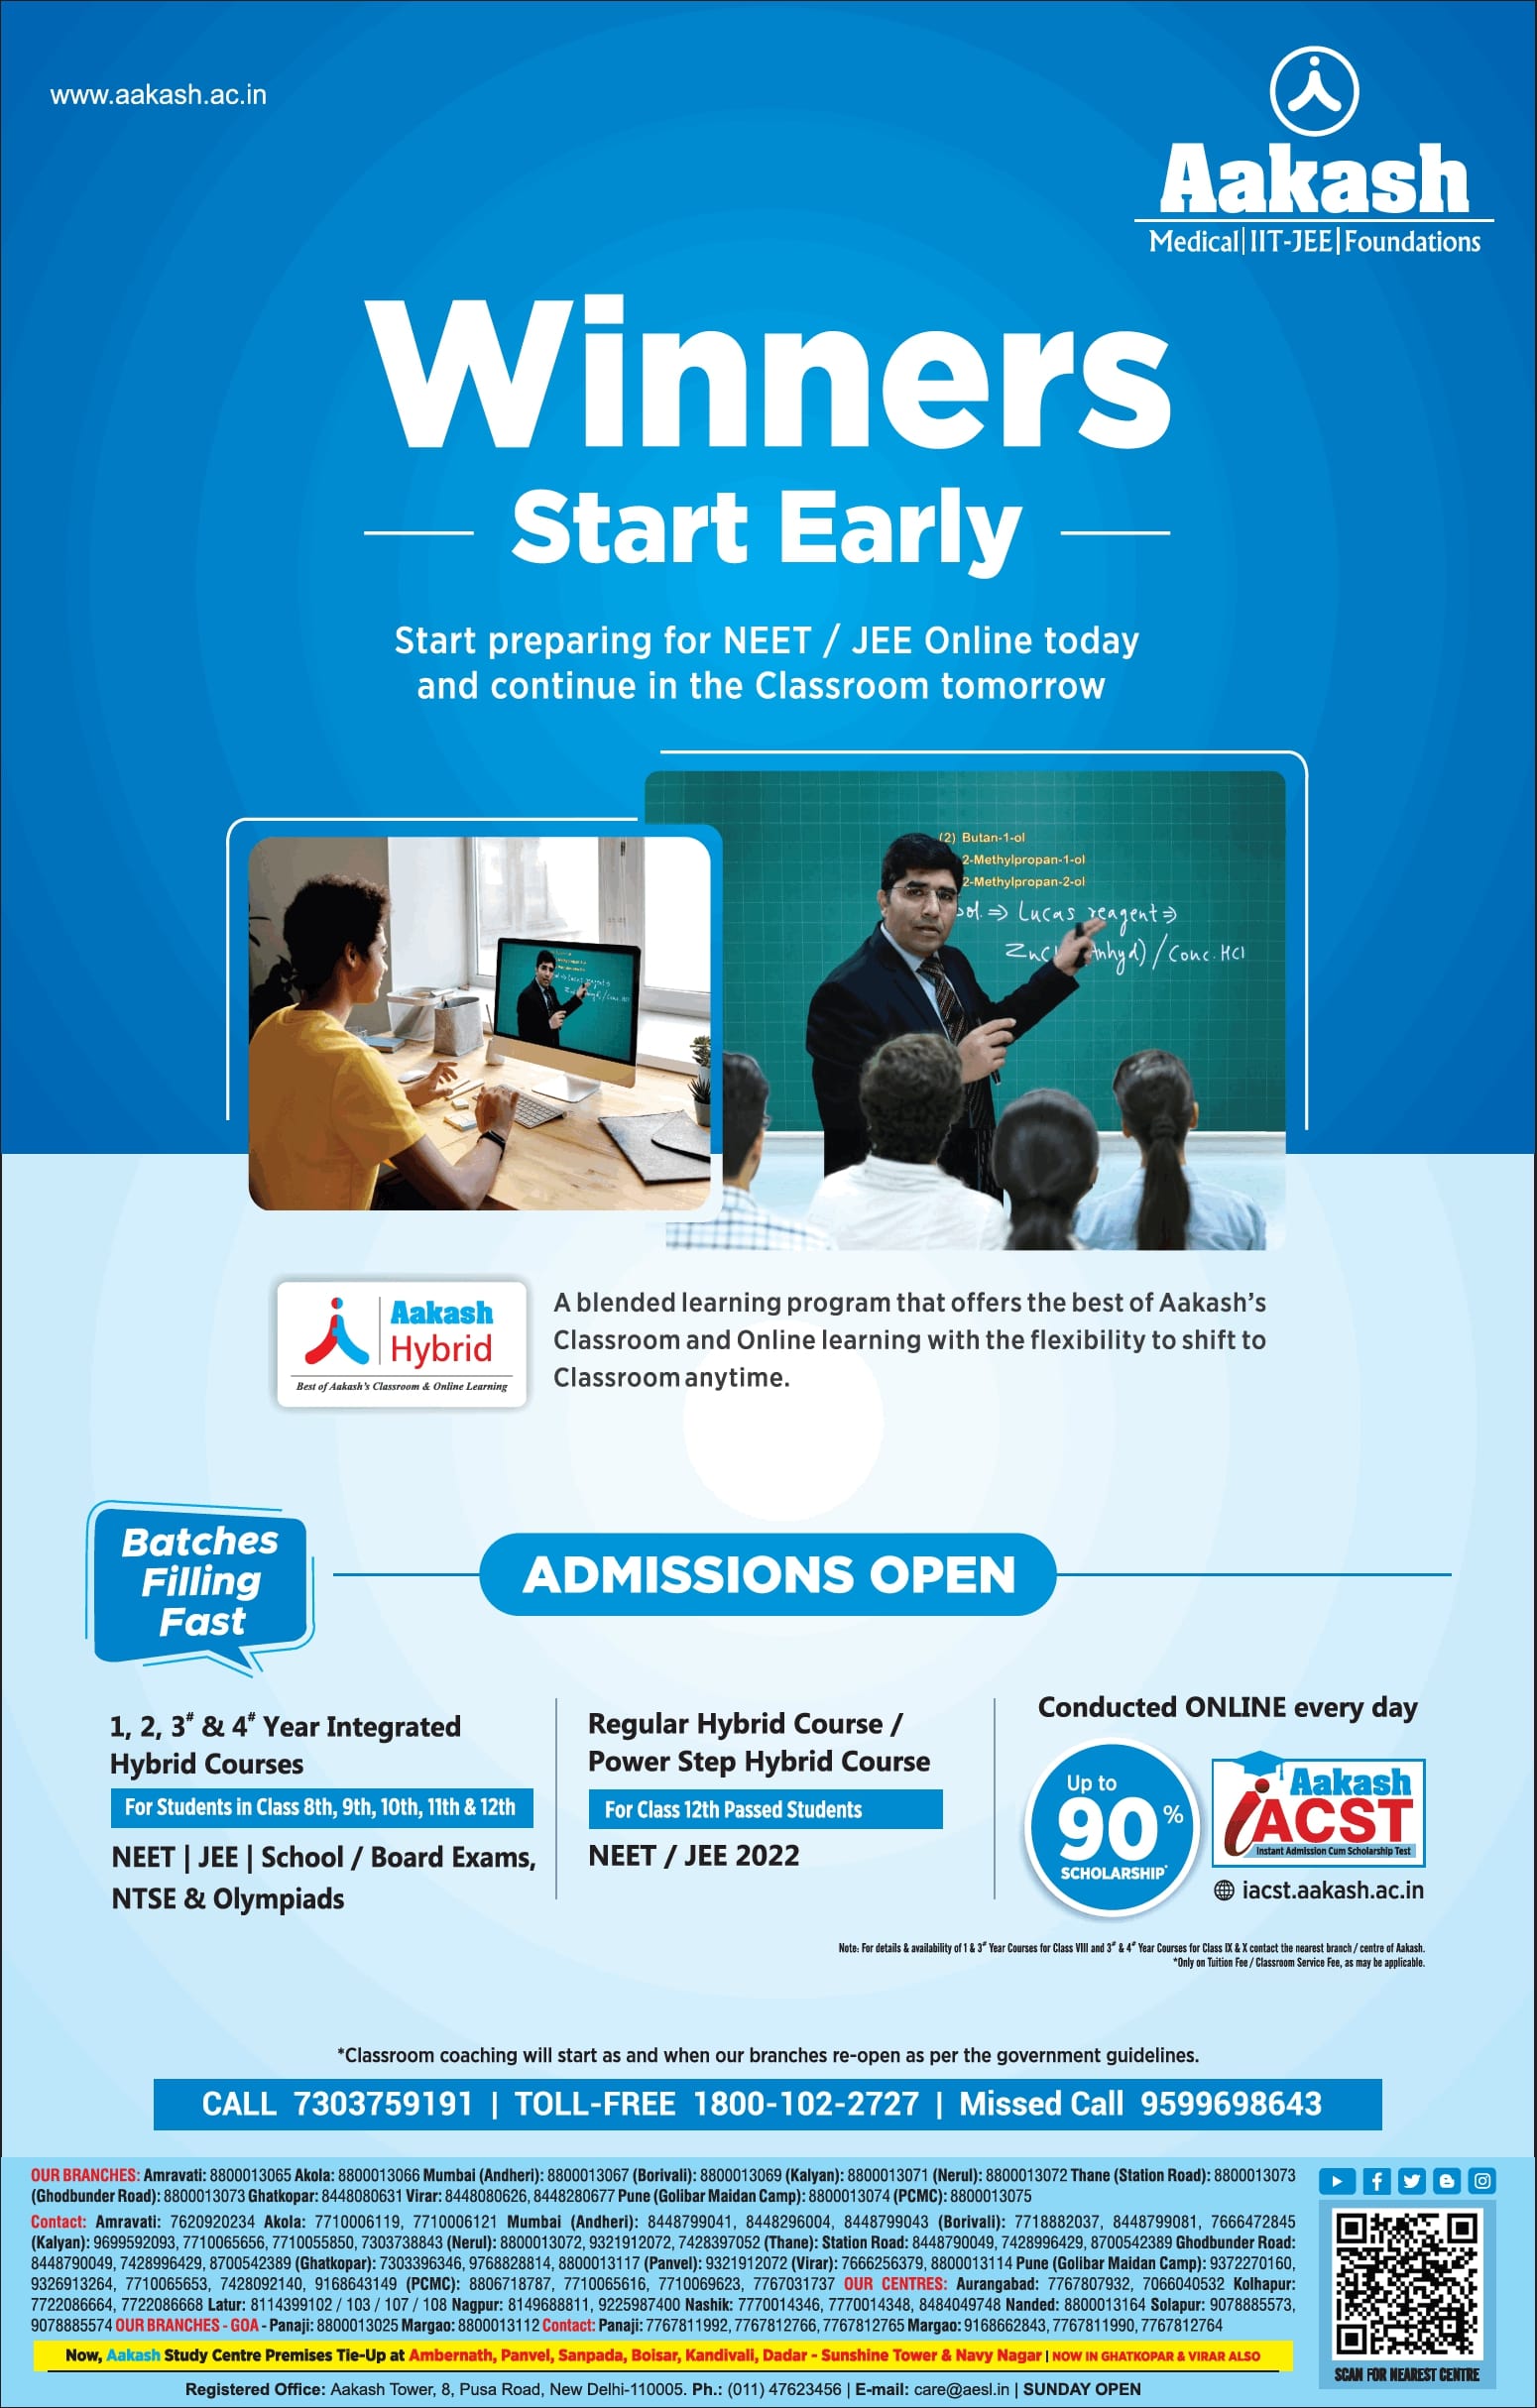 aakash-winners-start-early-admission-open-ad-times-of-india-mumbai-30-05-2021